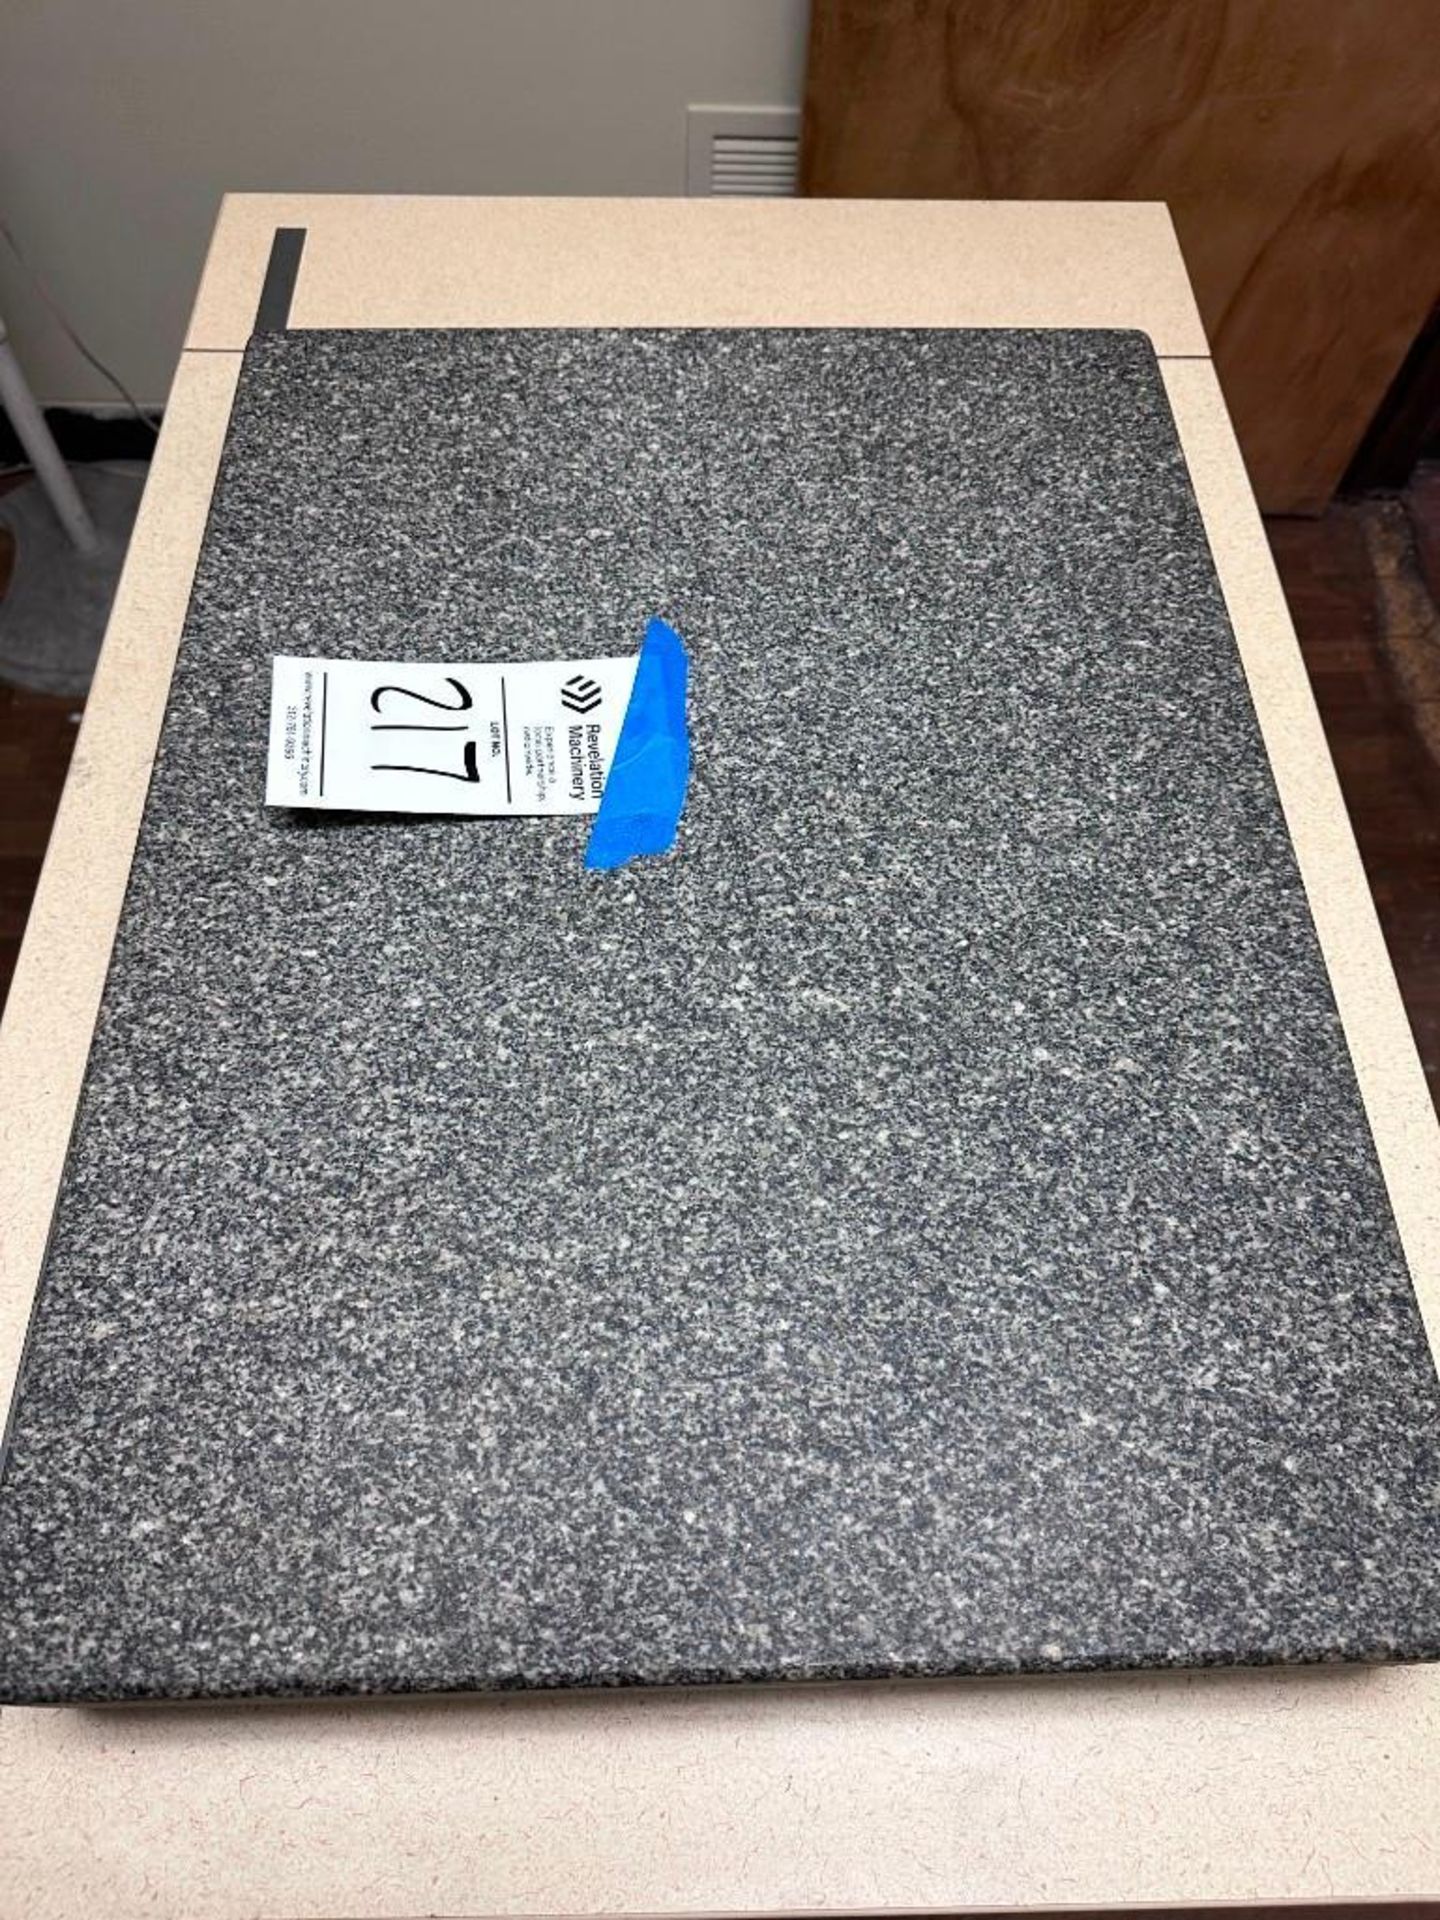 GRANITE SURFACE INSPECTION PLATE - Image 2 of 6